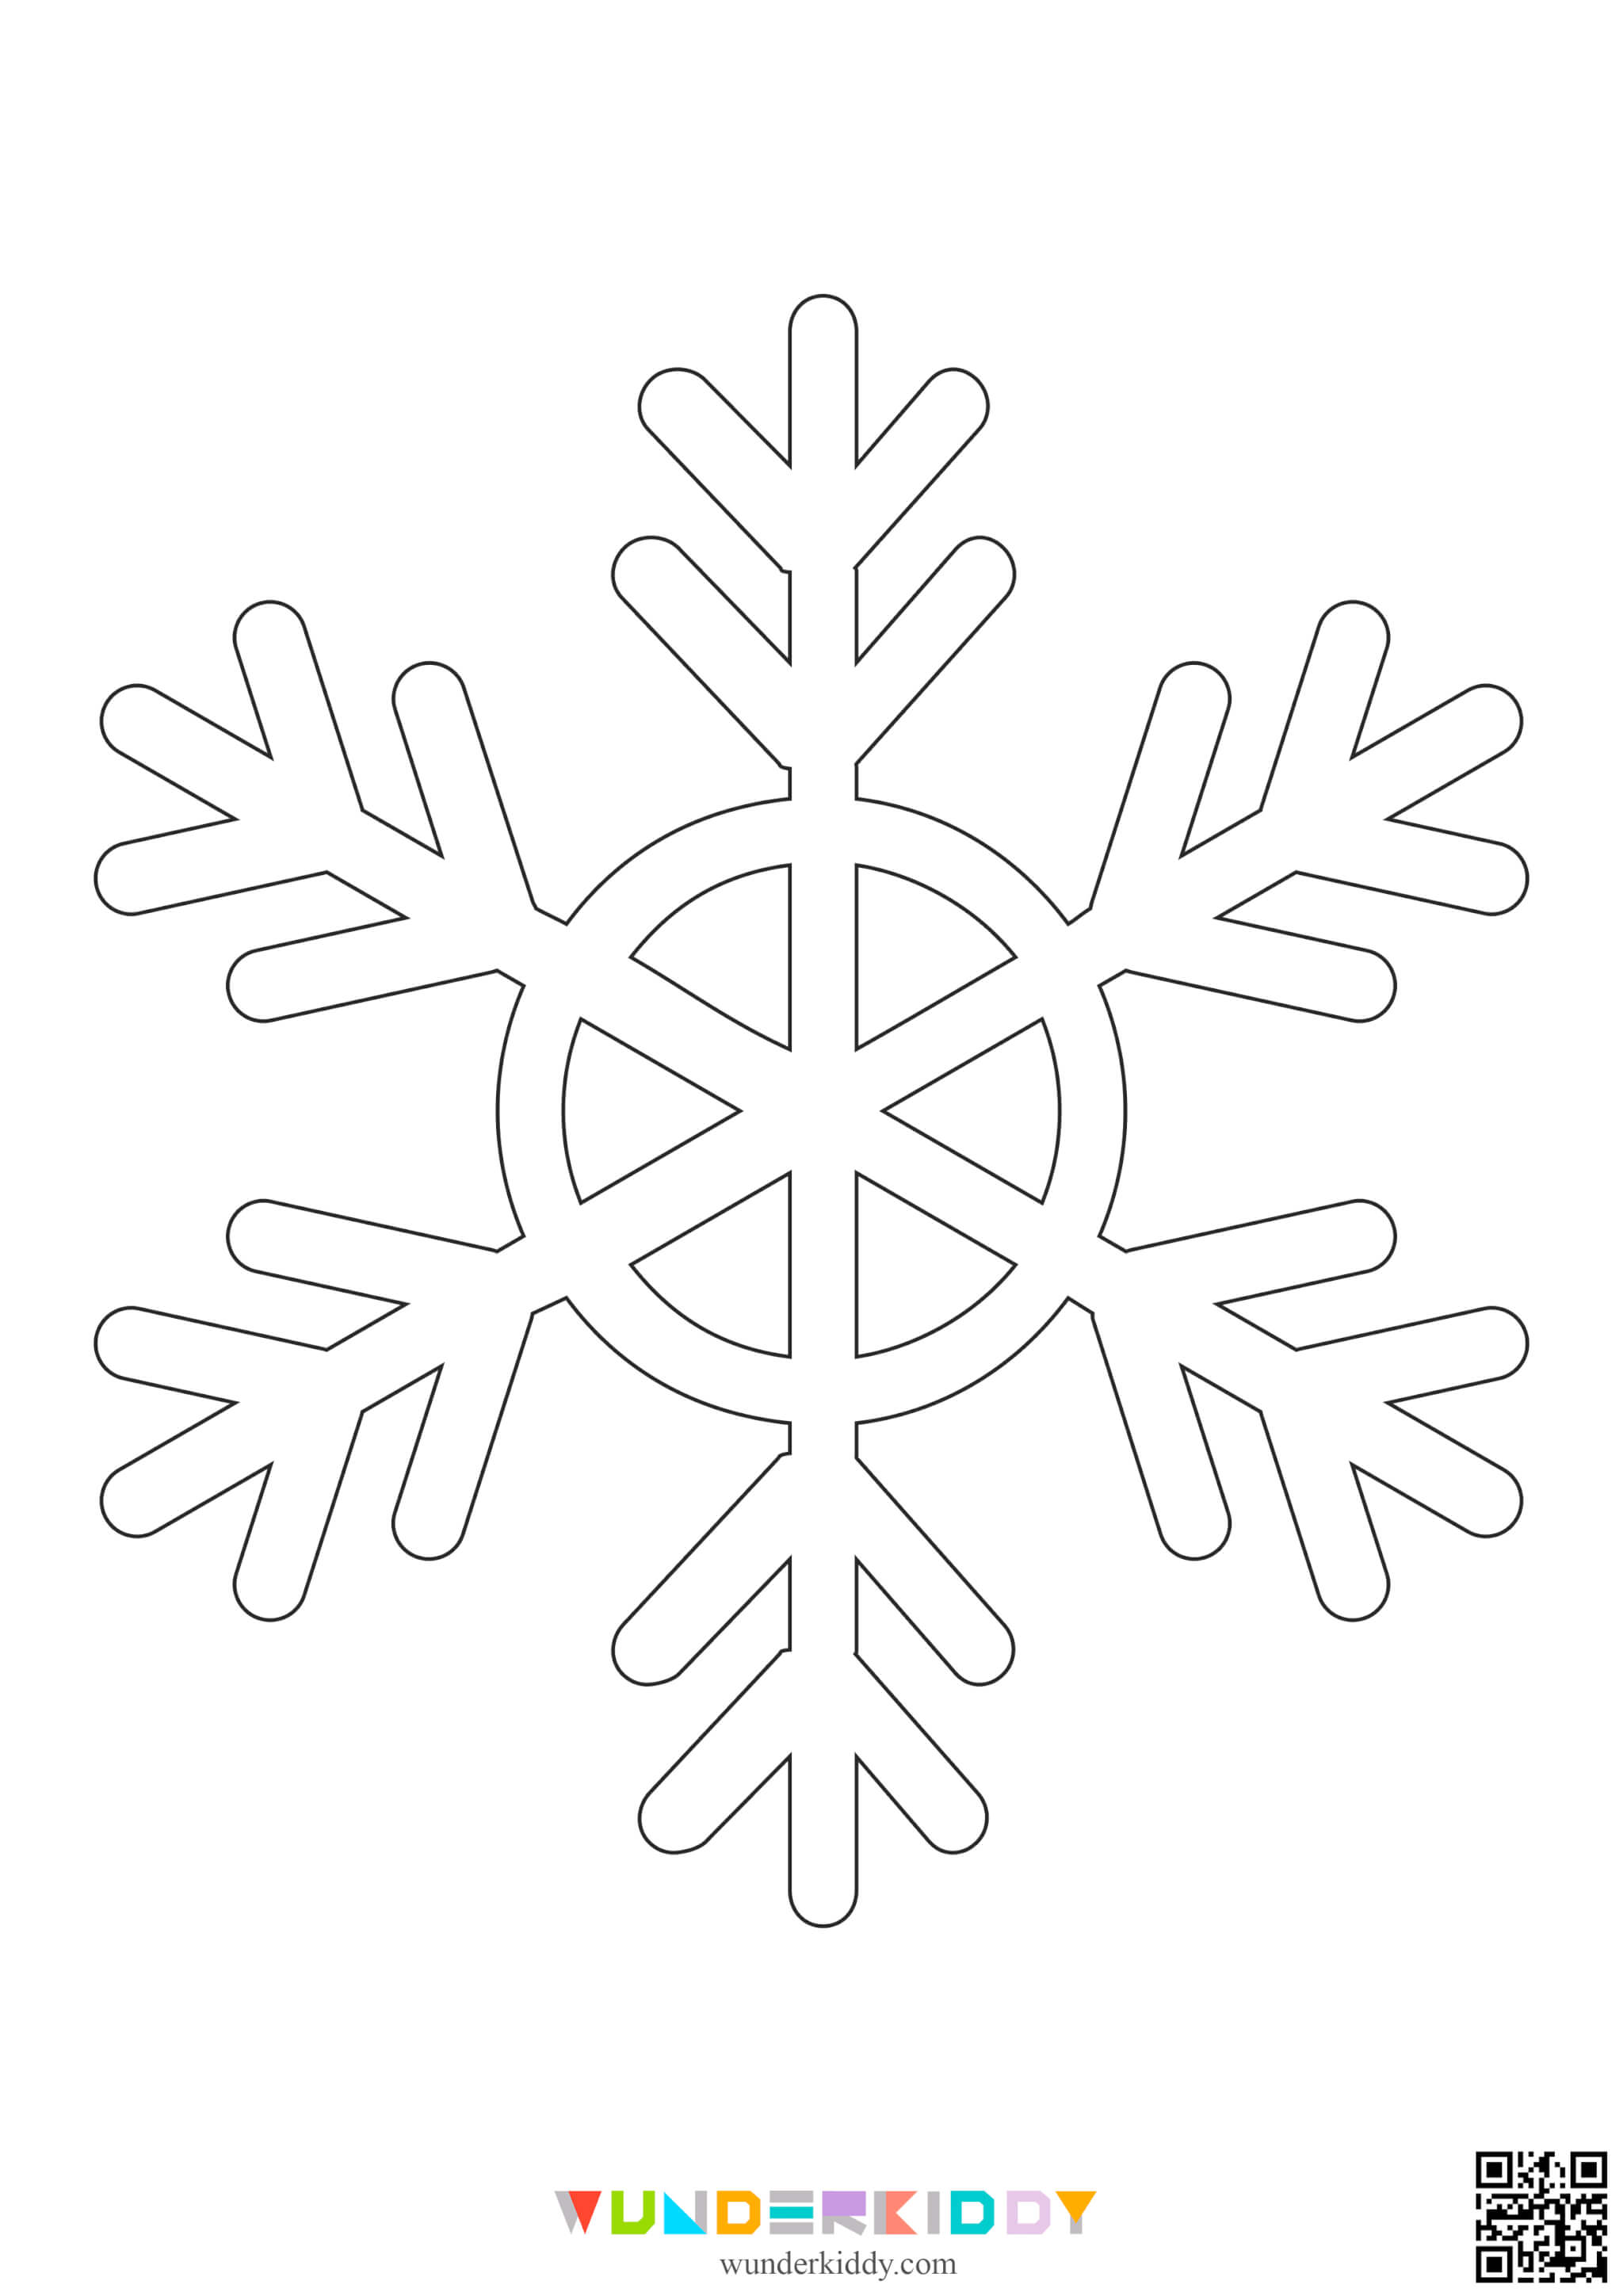 Snowflakes Template - Image 19